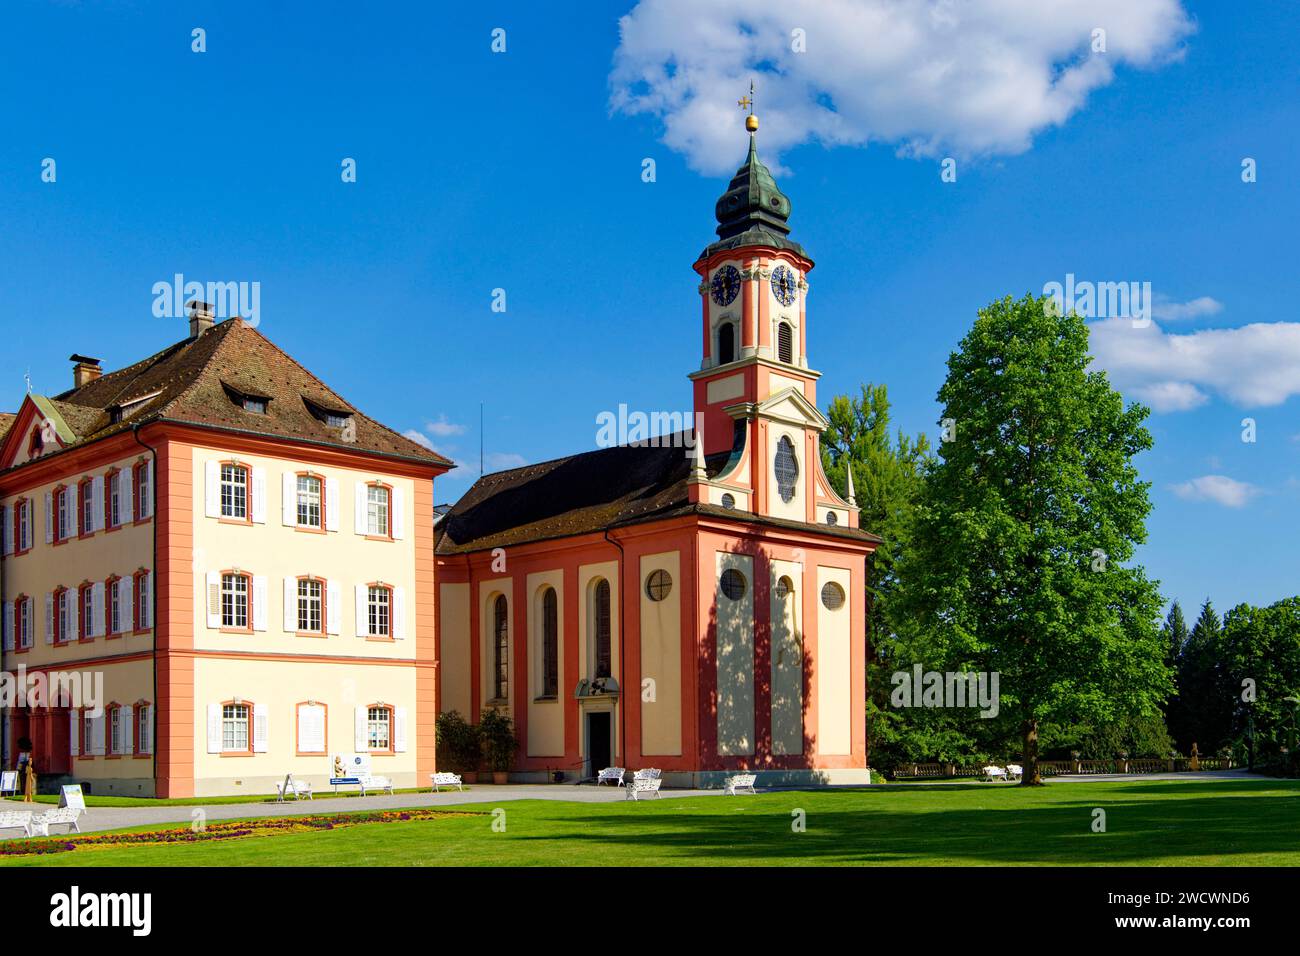 Germany, Bade Wurttemberg, Lake Constance (Bodensee), Mainau Island, garden island on Lake Constance, Castle and church Stock Photo